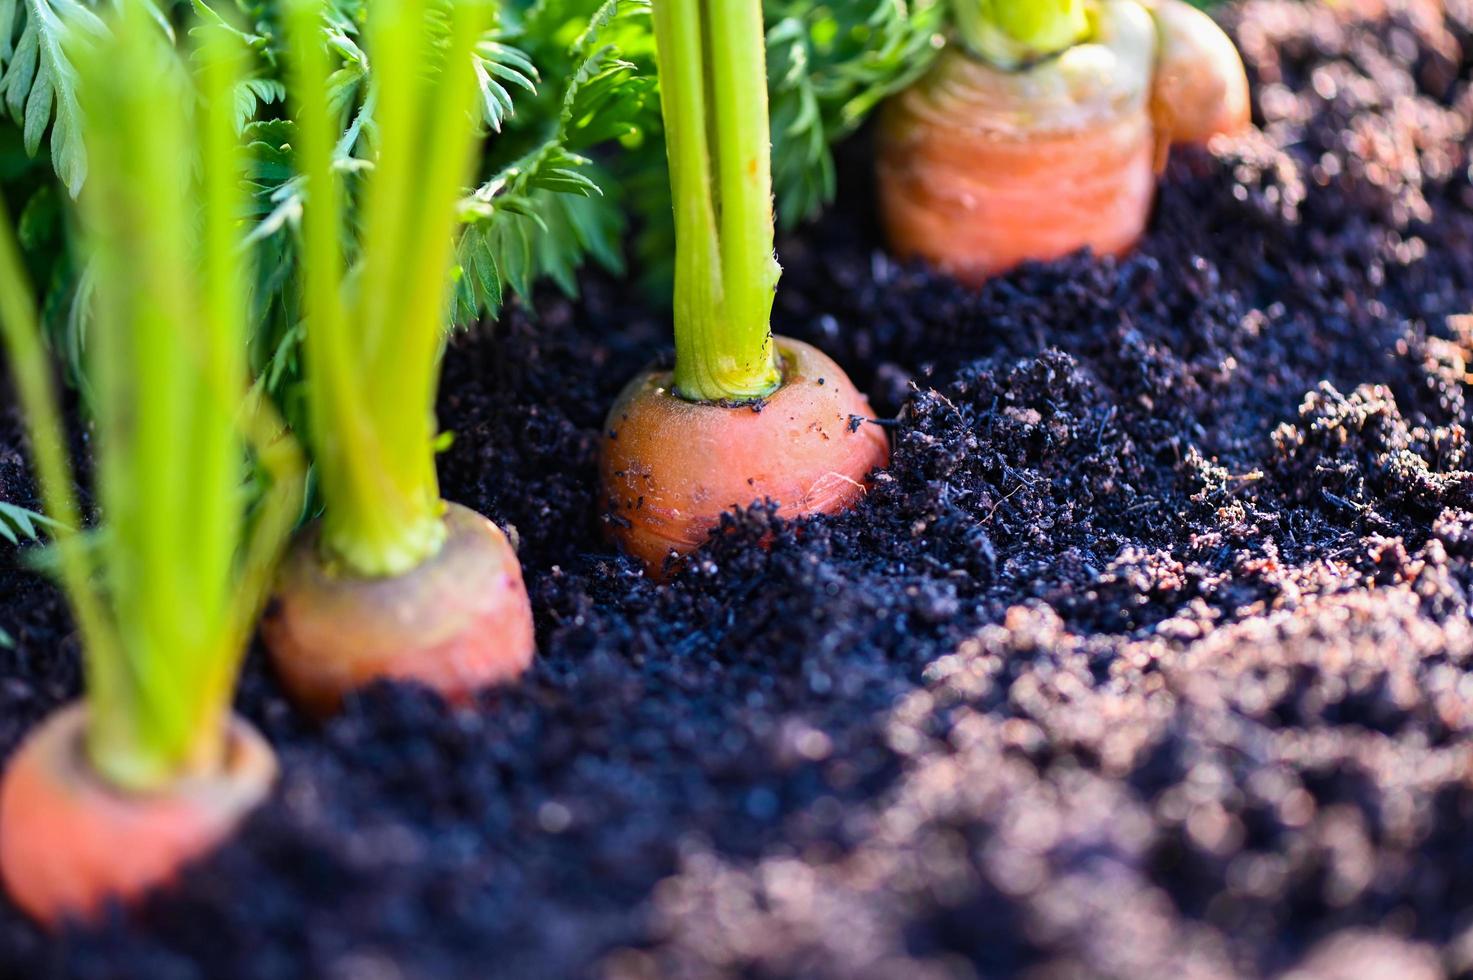 carrots growing in the soil organic farm carrot on ground , fresh carrots growing in carrot field vegetable grows in the garden harvest agricultural product nature photo